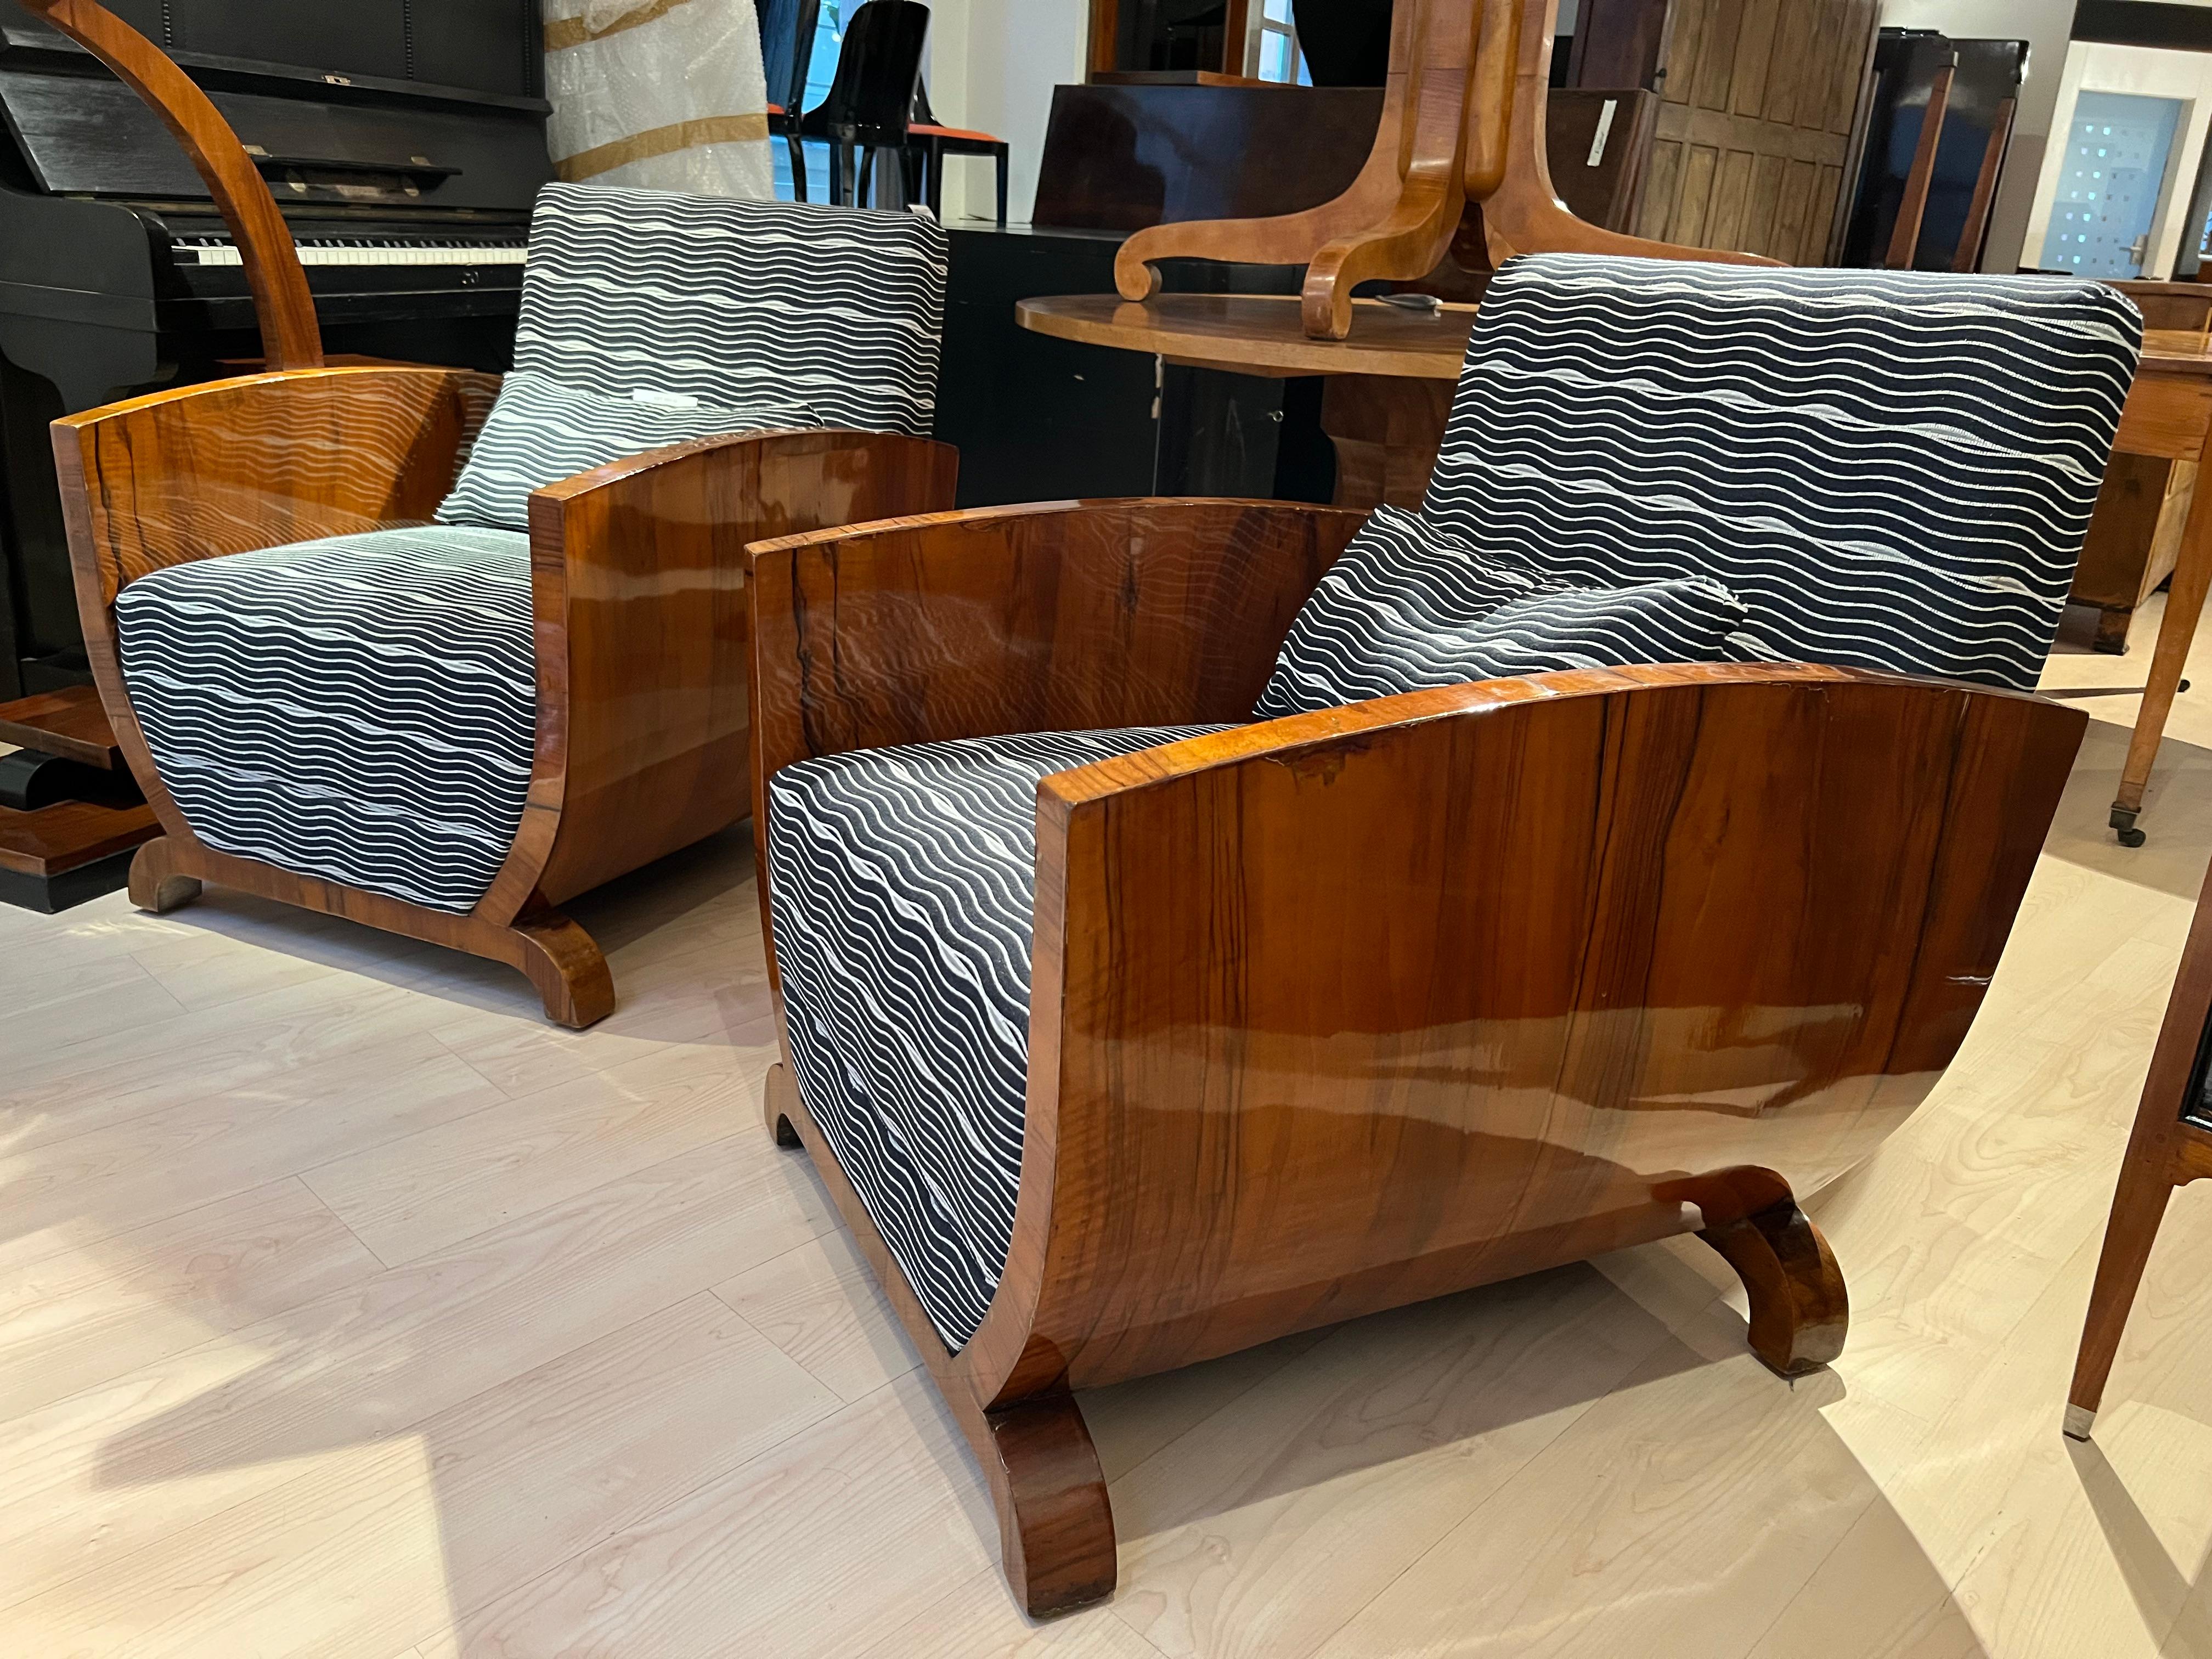 Very elegant Pair of Art Deco Club Chair from France, circa 1930.
 
Walnut veneered on soft wood, French polished.
 
New upholstery with a nice grey/white fabric from Backhausen, Vienna.
Very good seat-comfort. One optional cushion per chair is